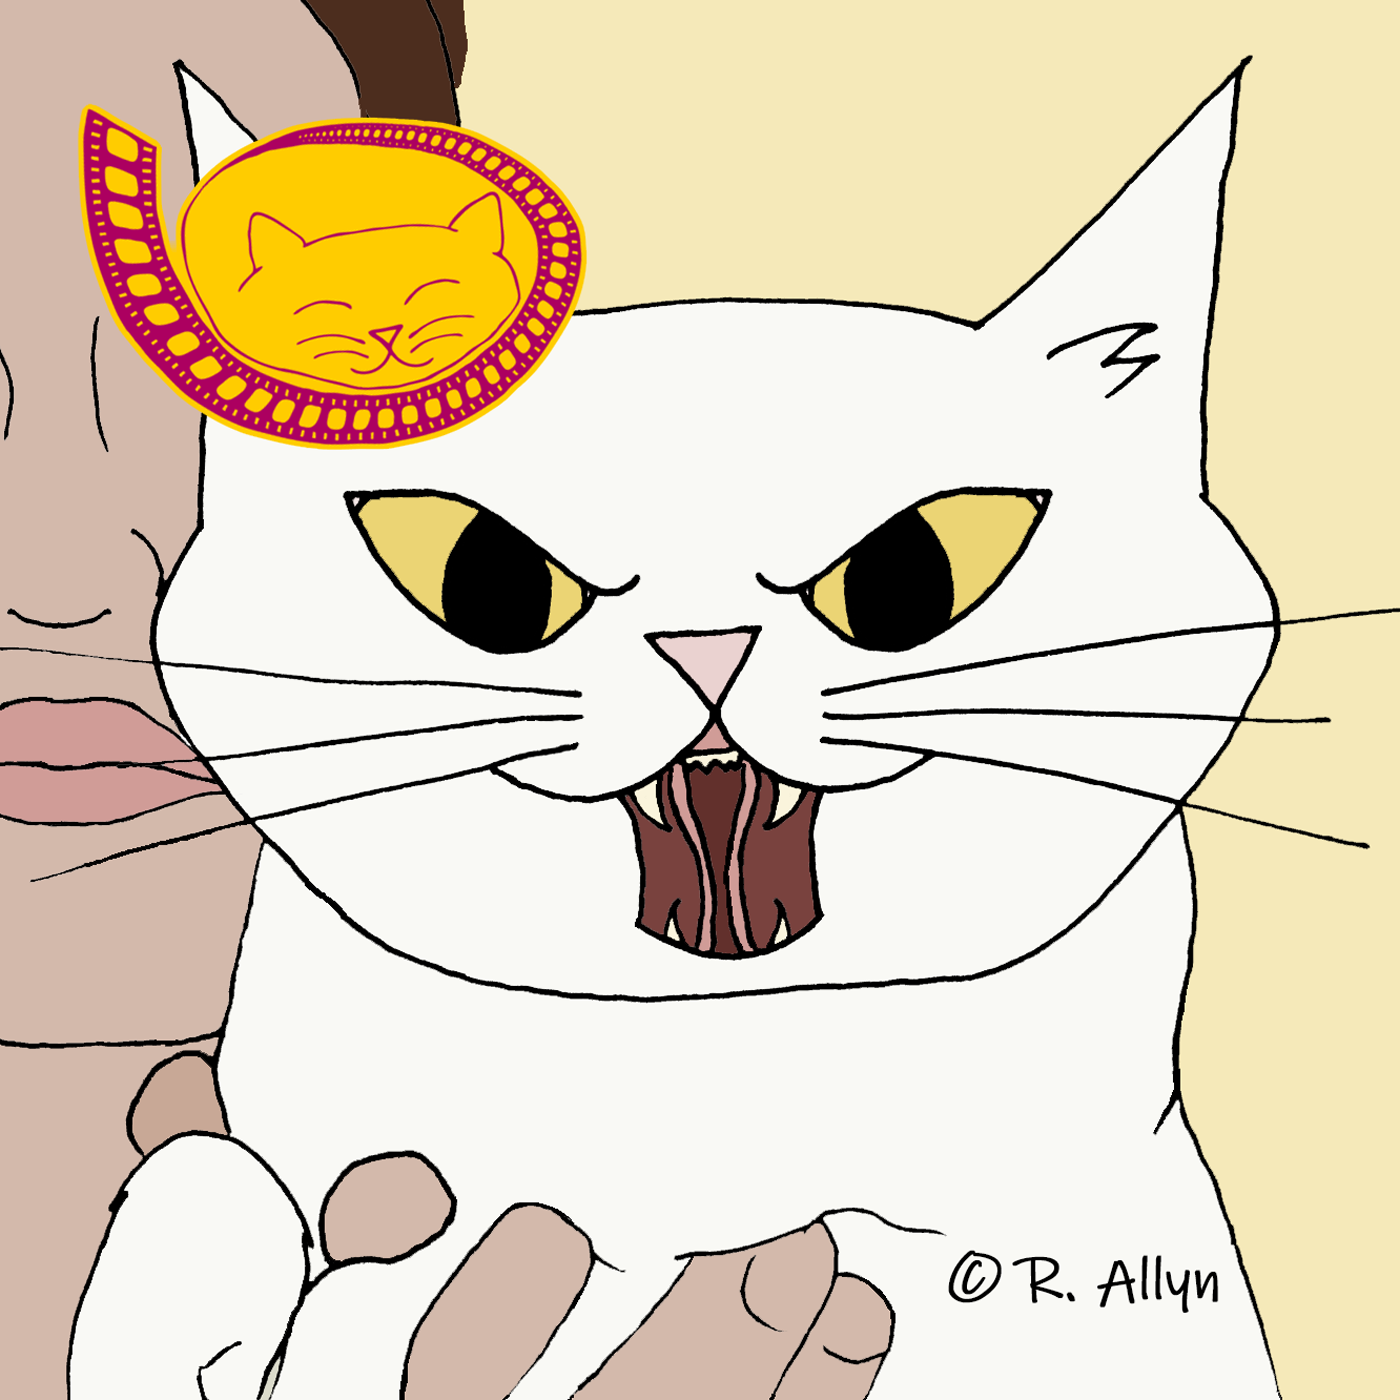 Illustration of the white cat in the movie The Mummy